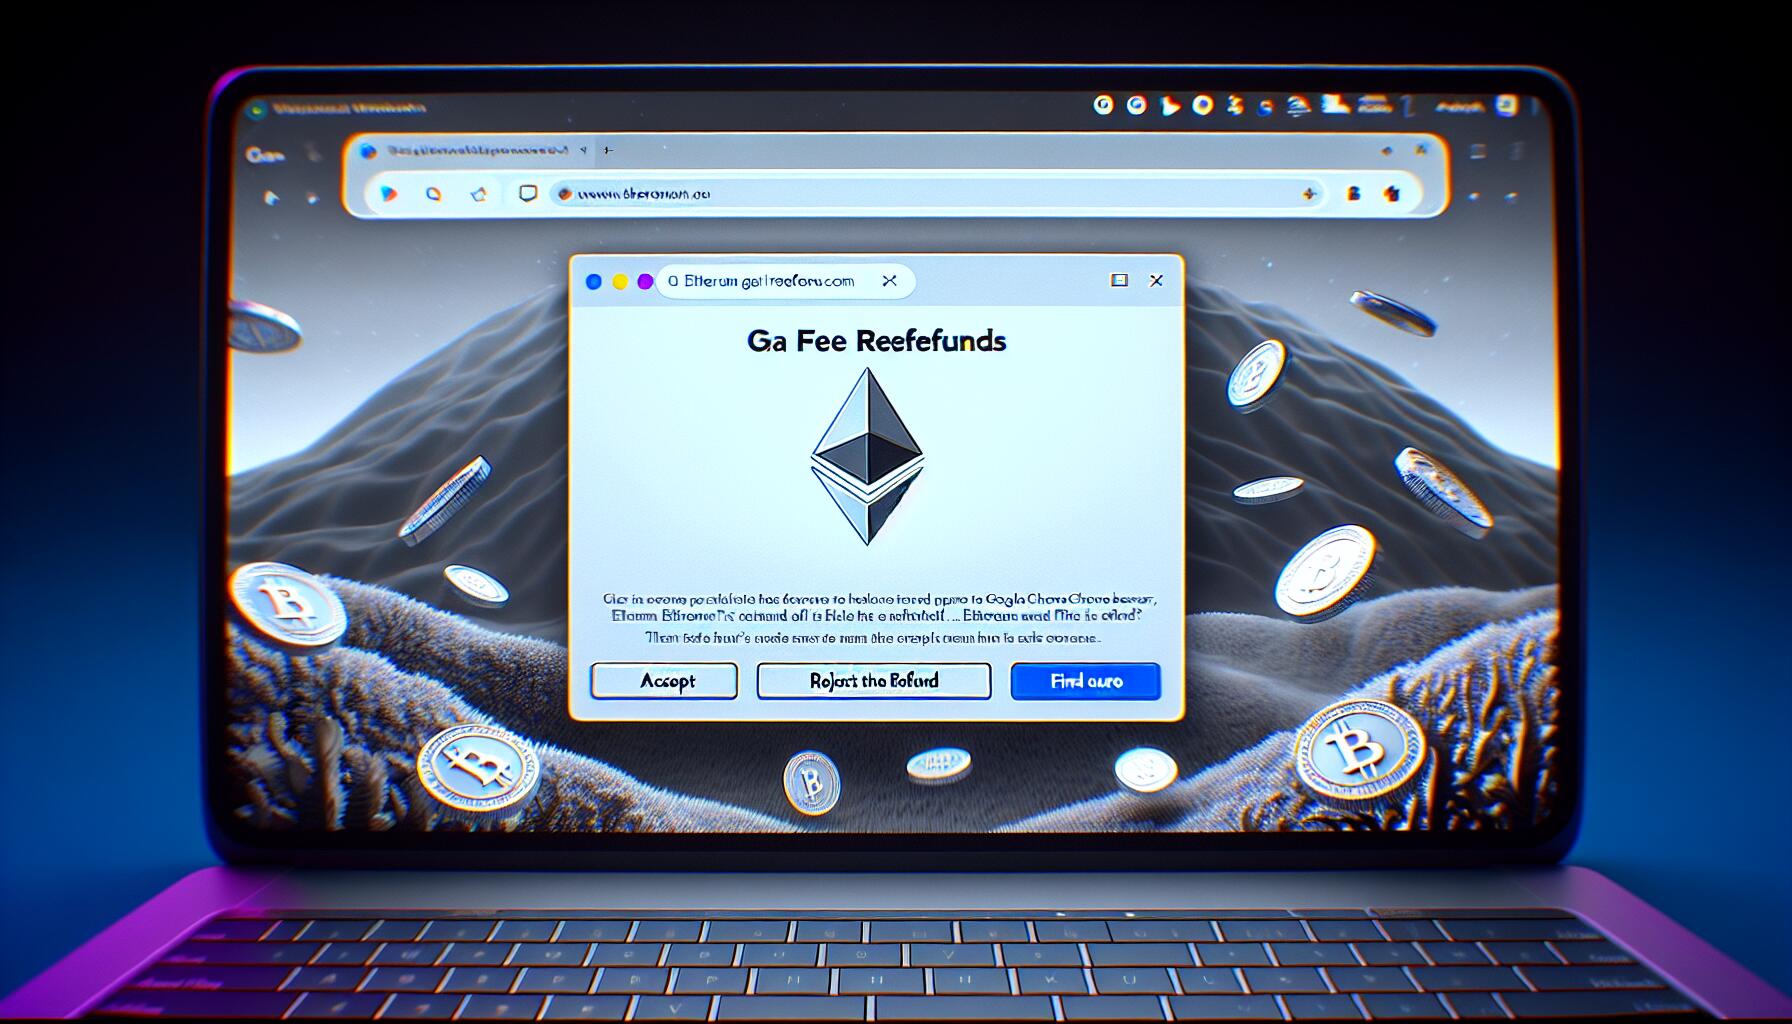 ethereum gas fee refunds ads